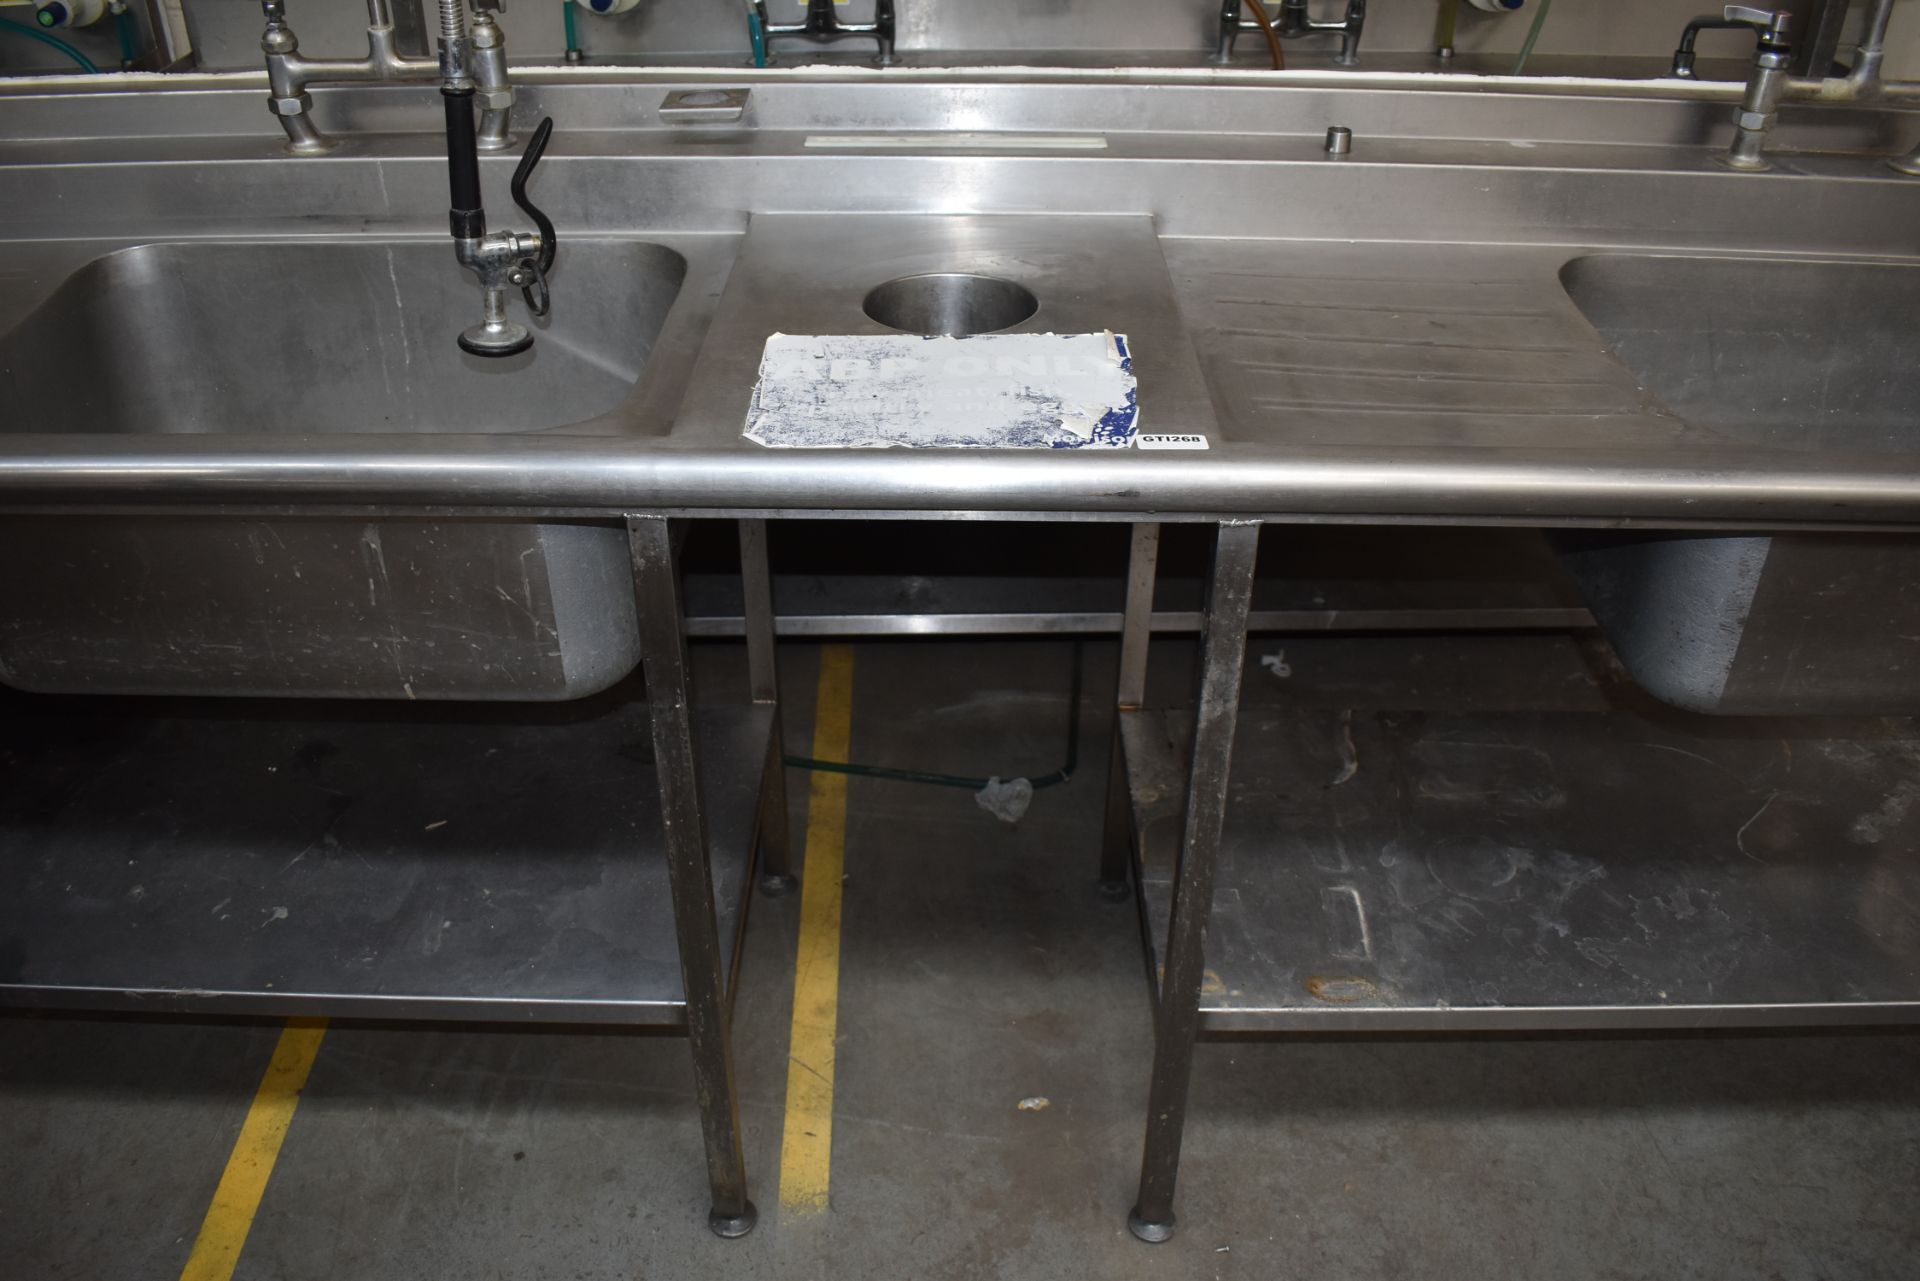 1 x Stainless Steel Commercial Wash Basin Unit With Twin Sink Bowl and Drainers, Mixer Taps, Spray H - Image 2 of 12